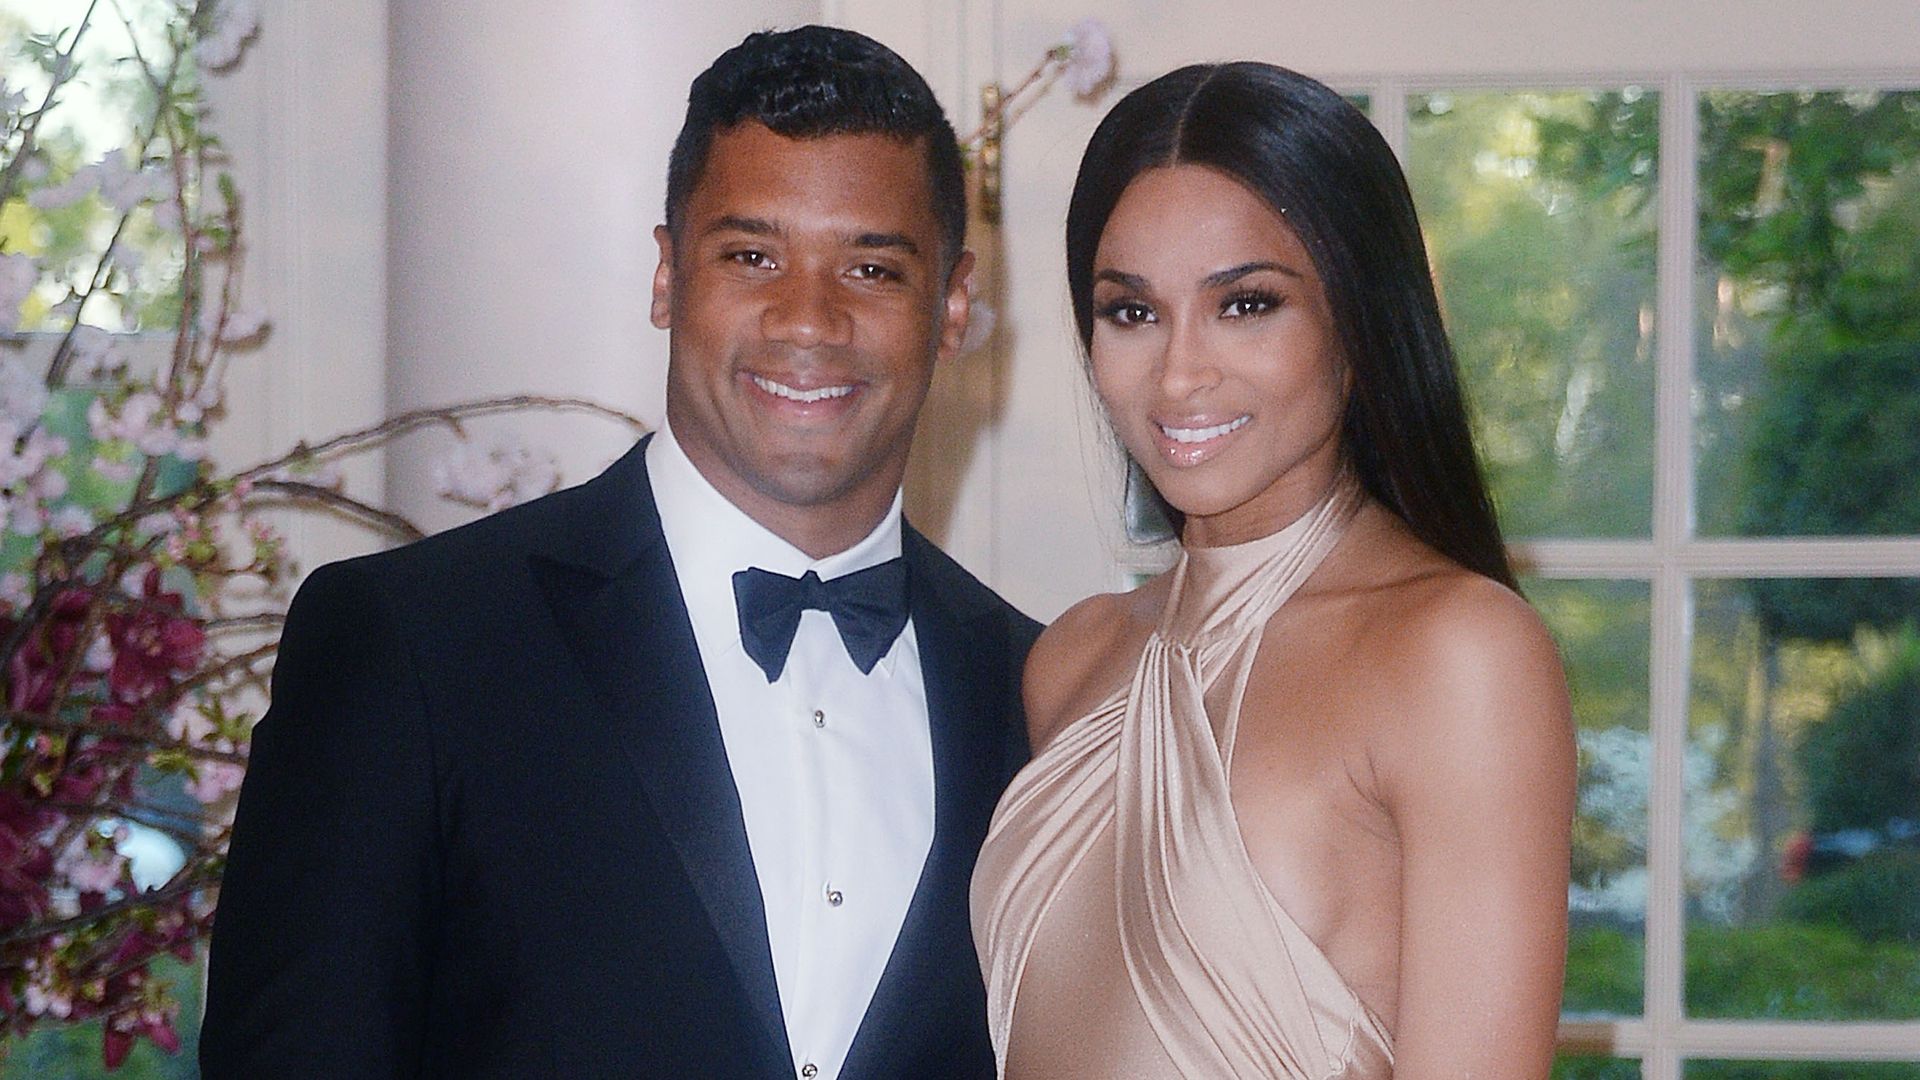 Ciara and Russell smile while wearing black tie attire